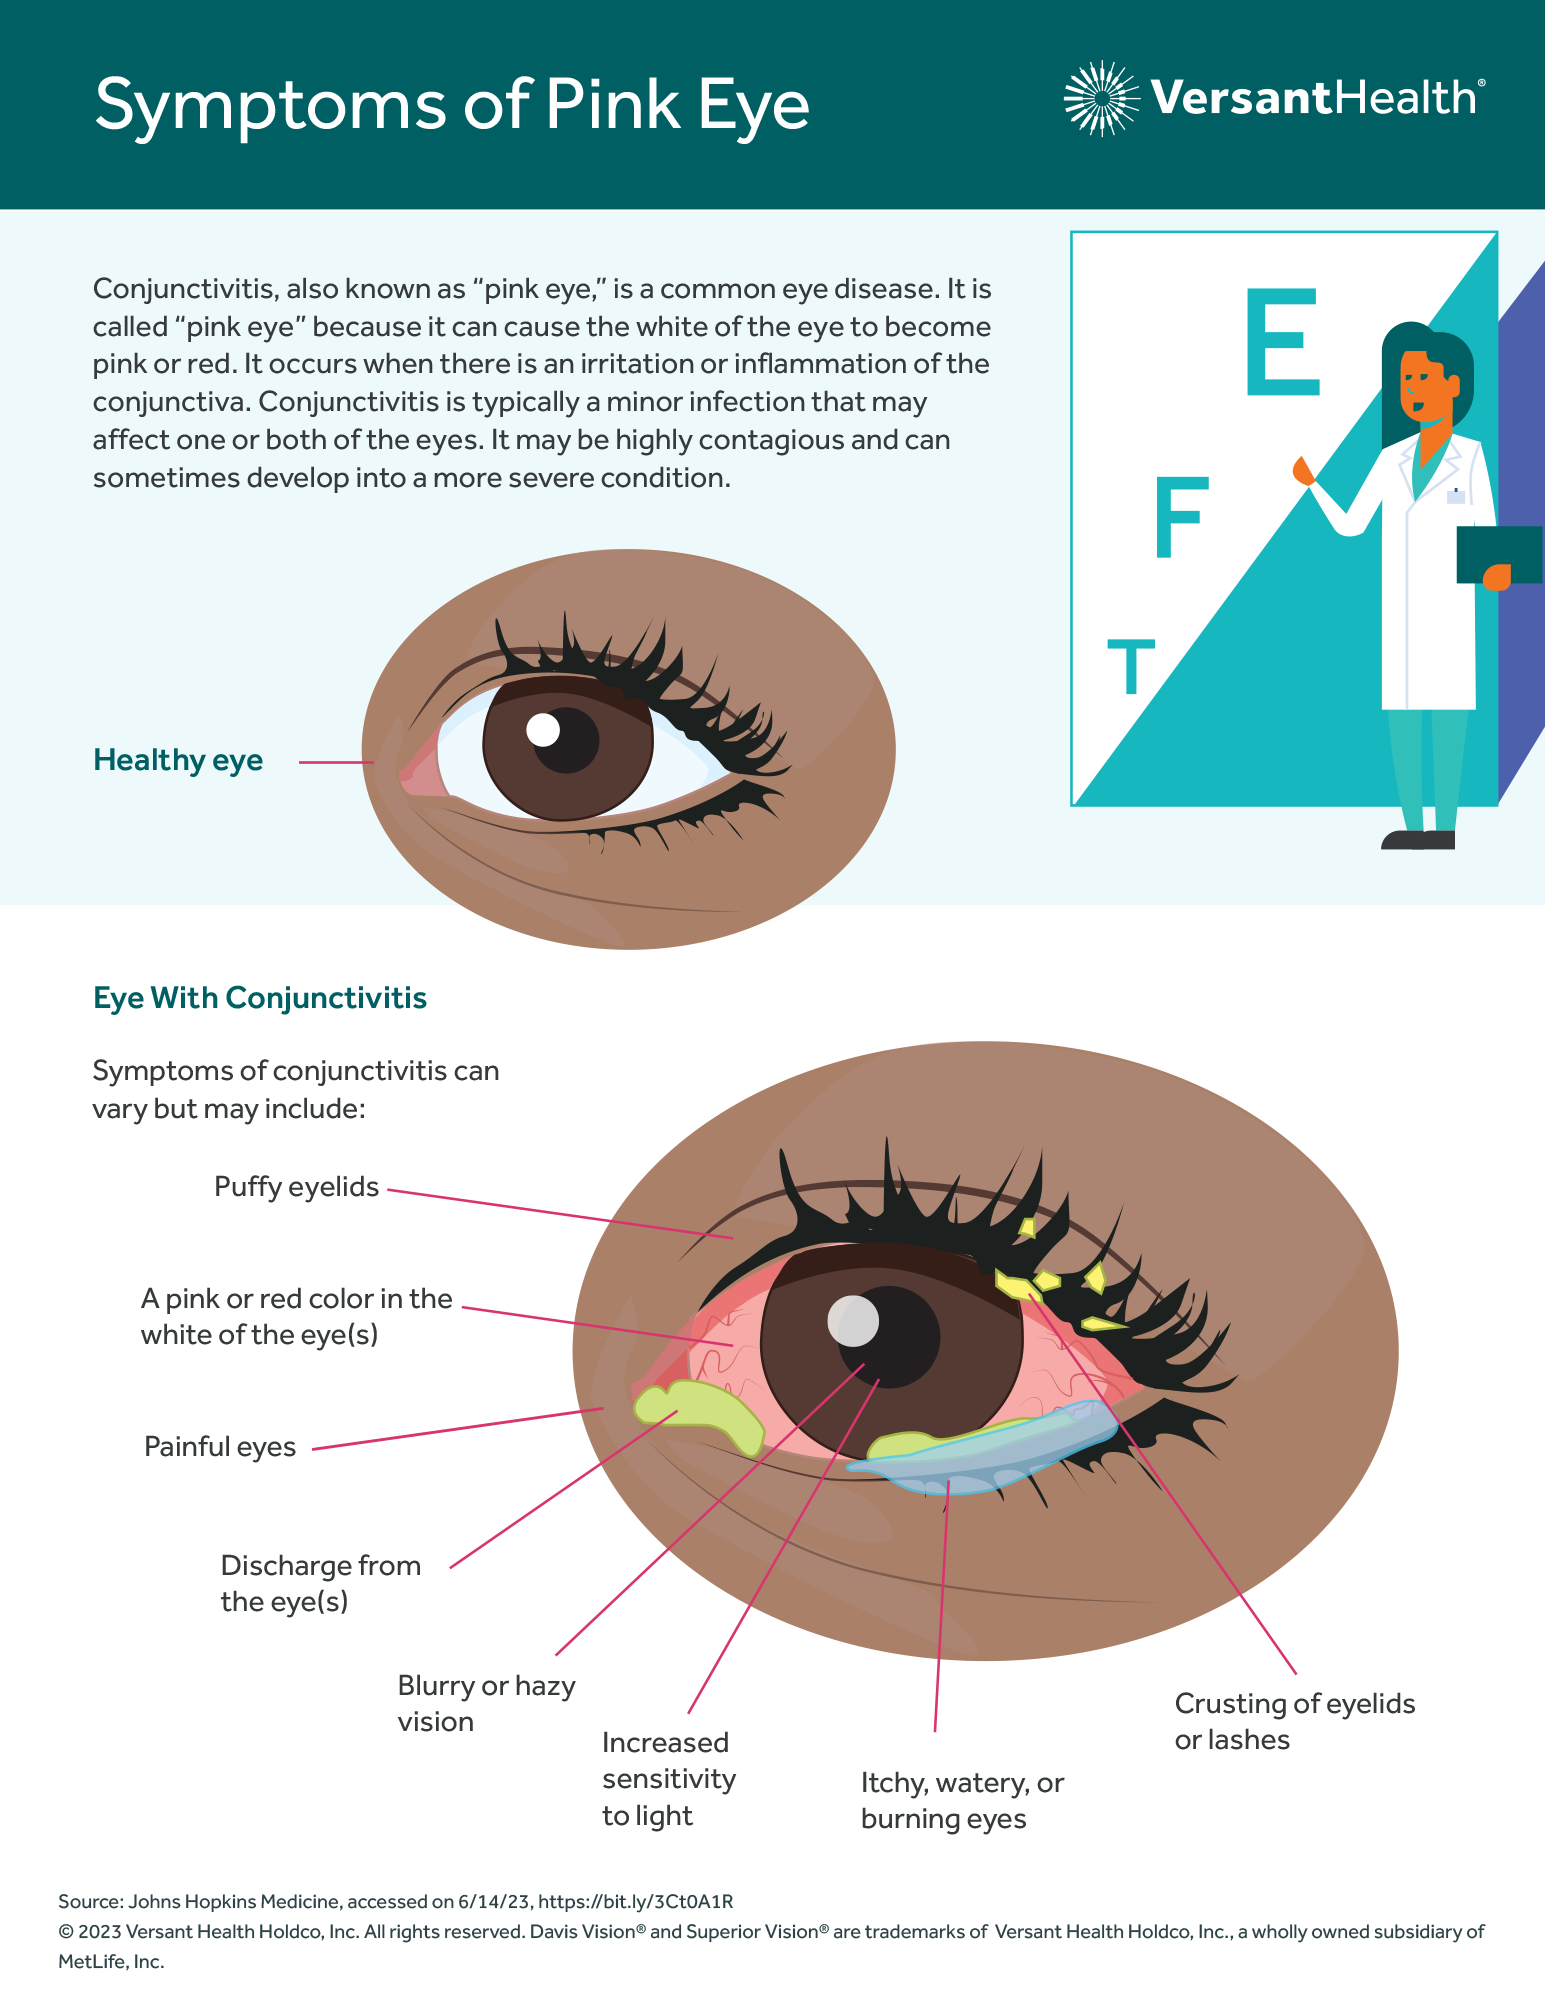 An infographic that describes the symptoms of pink eye